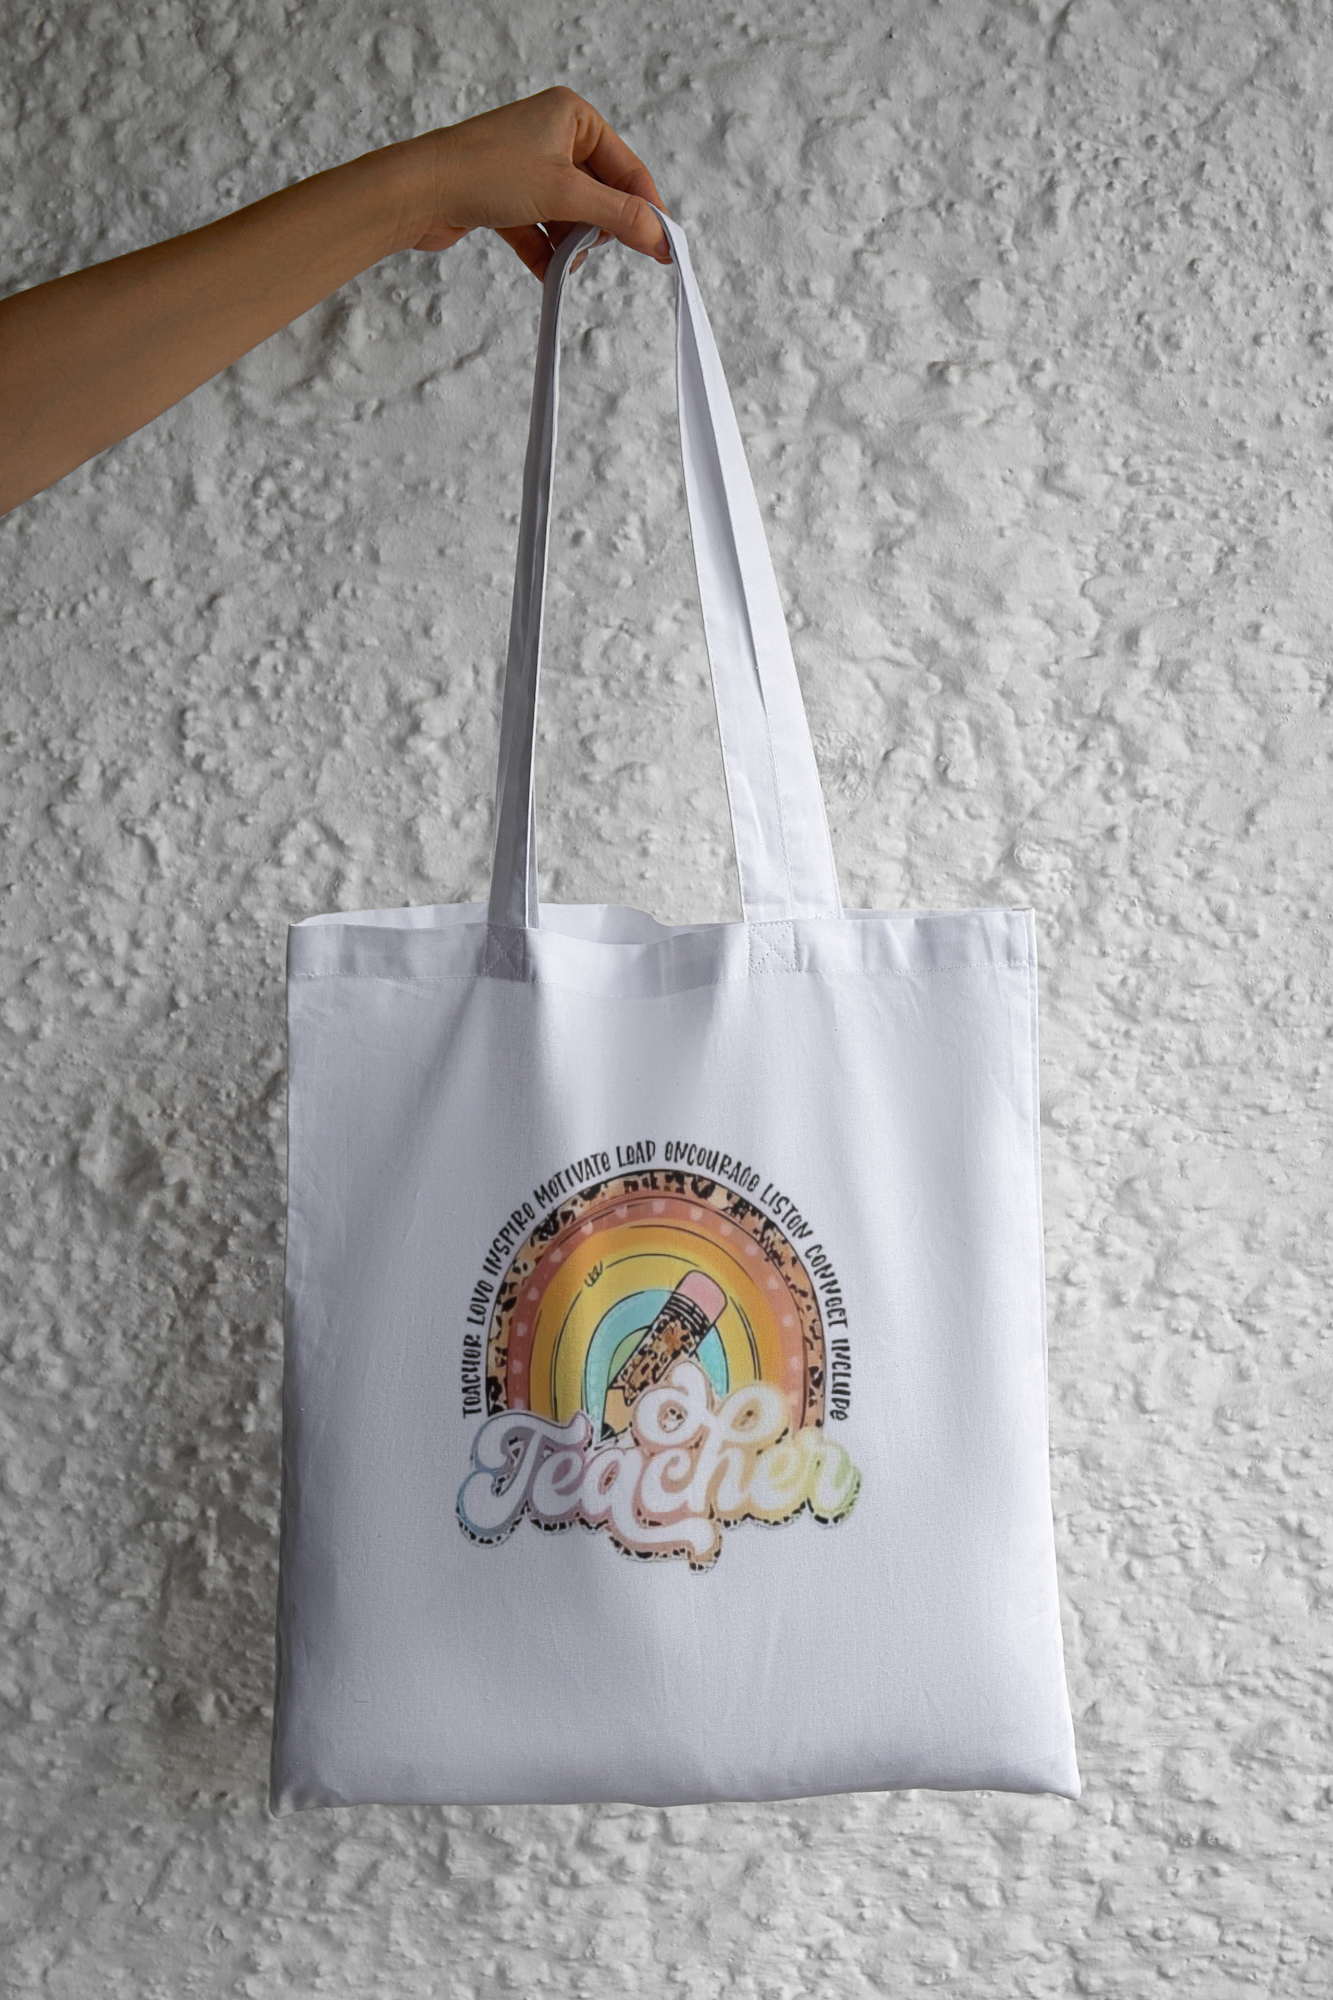 Personalized tote bag